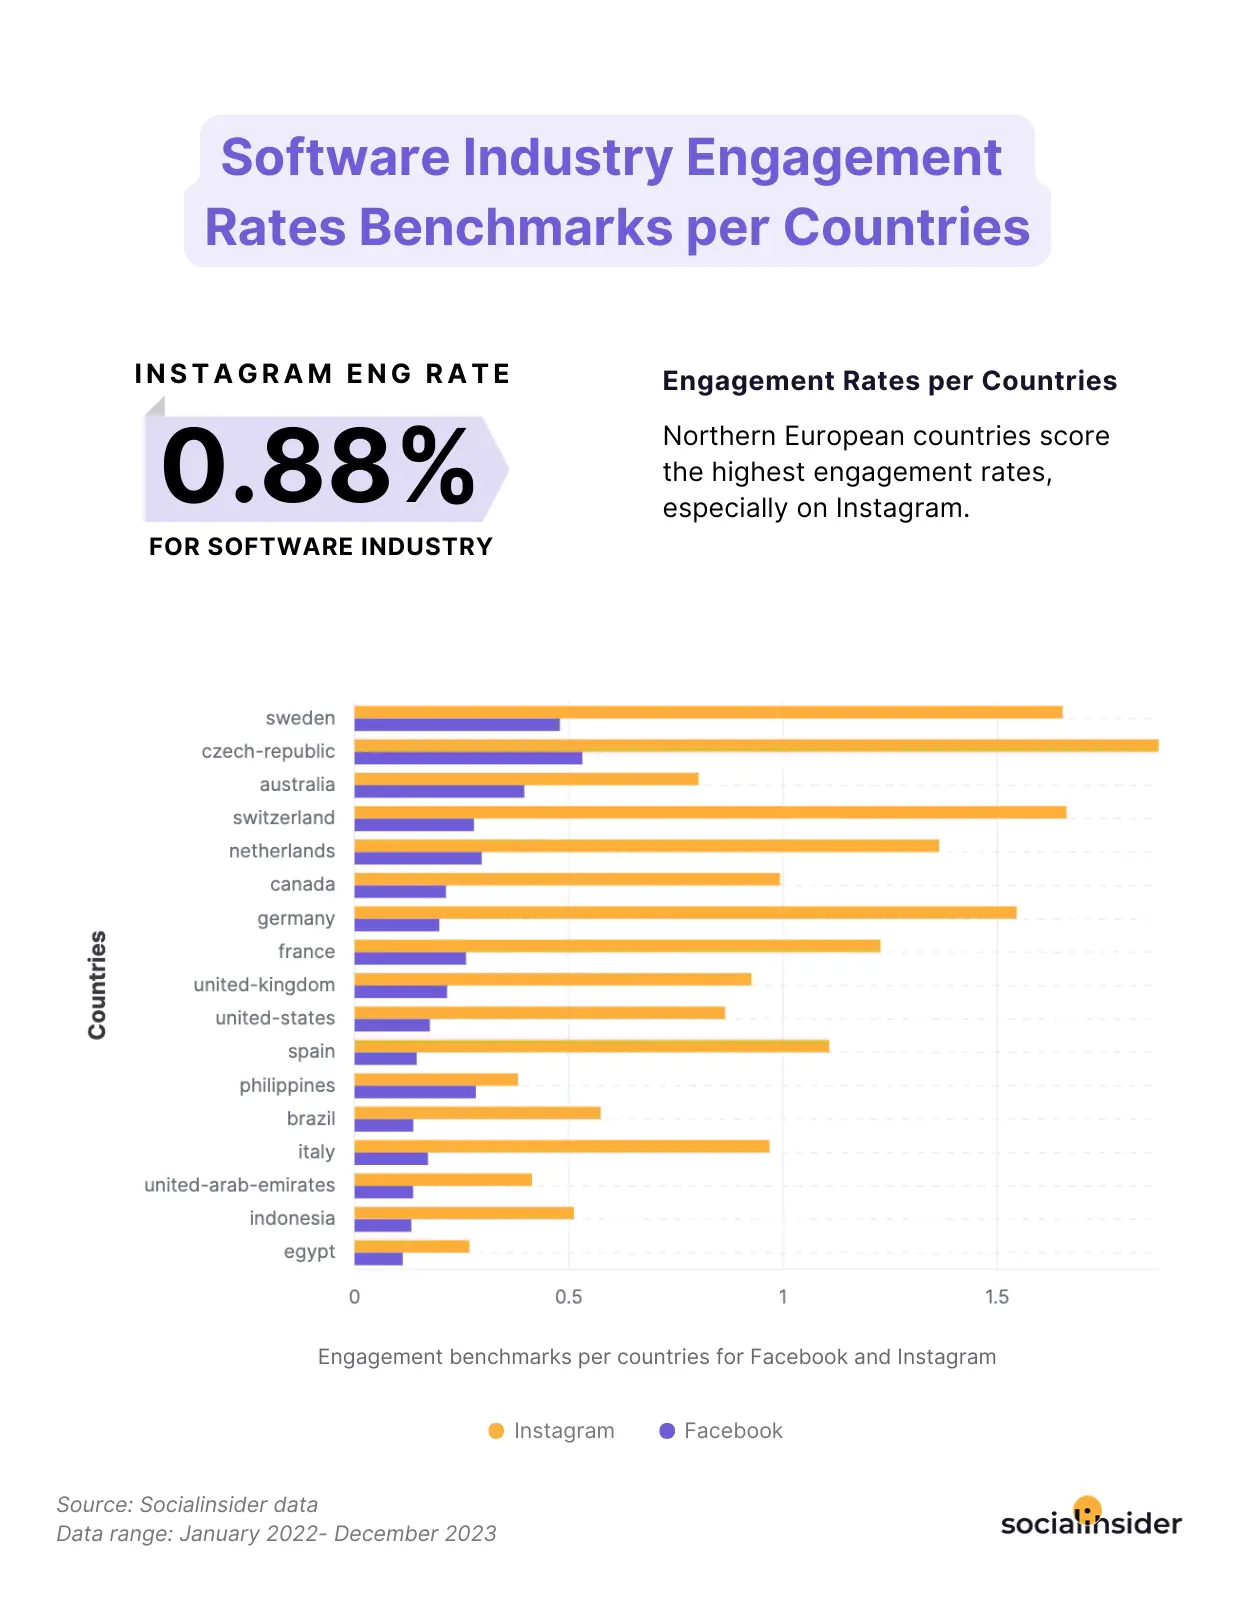 software industry regional engagement benchmarks